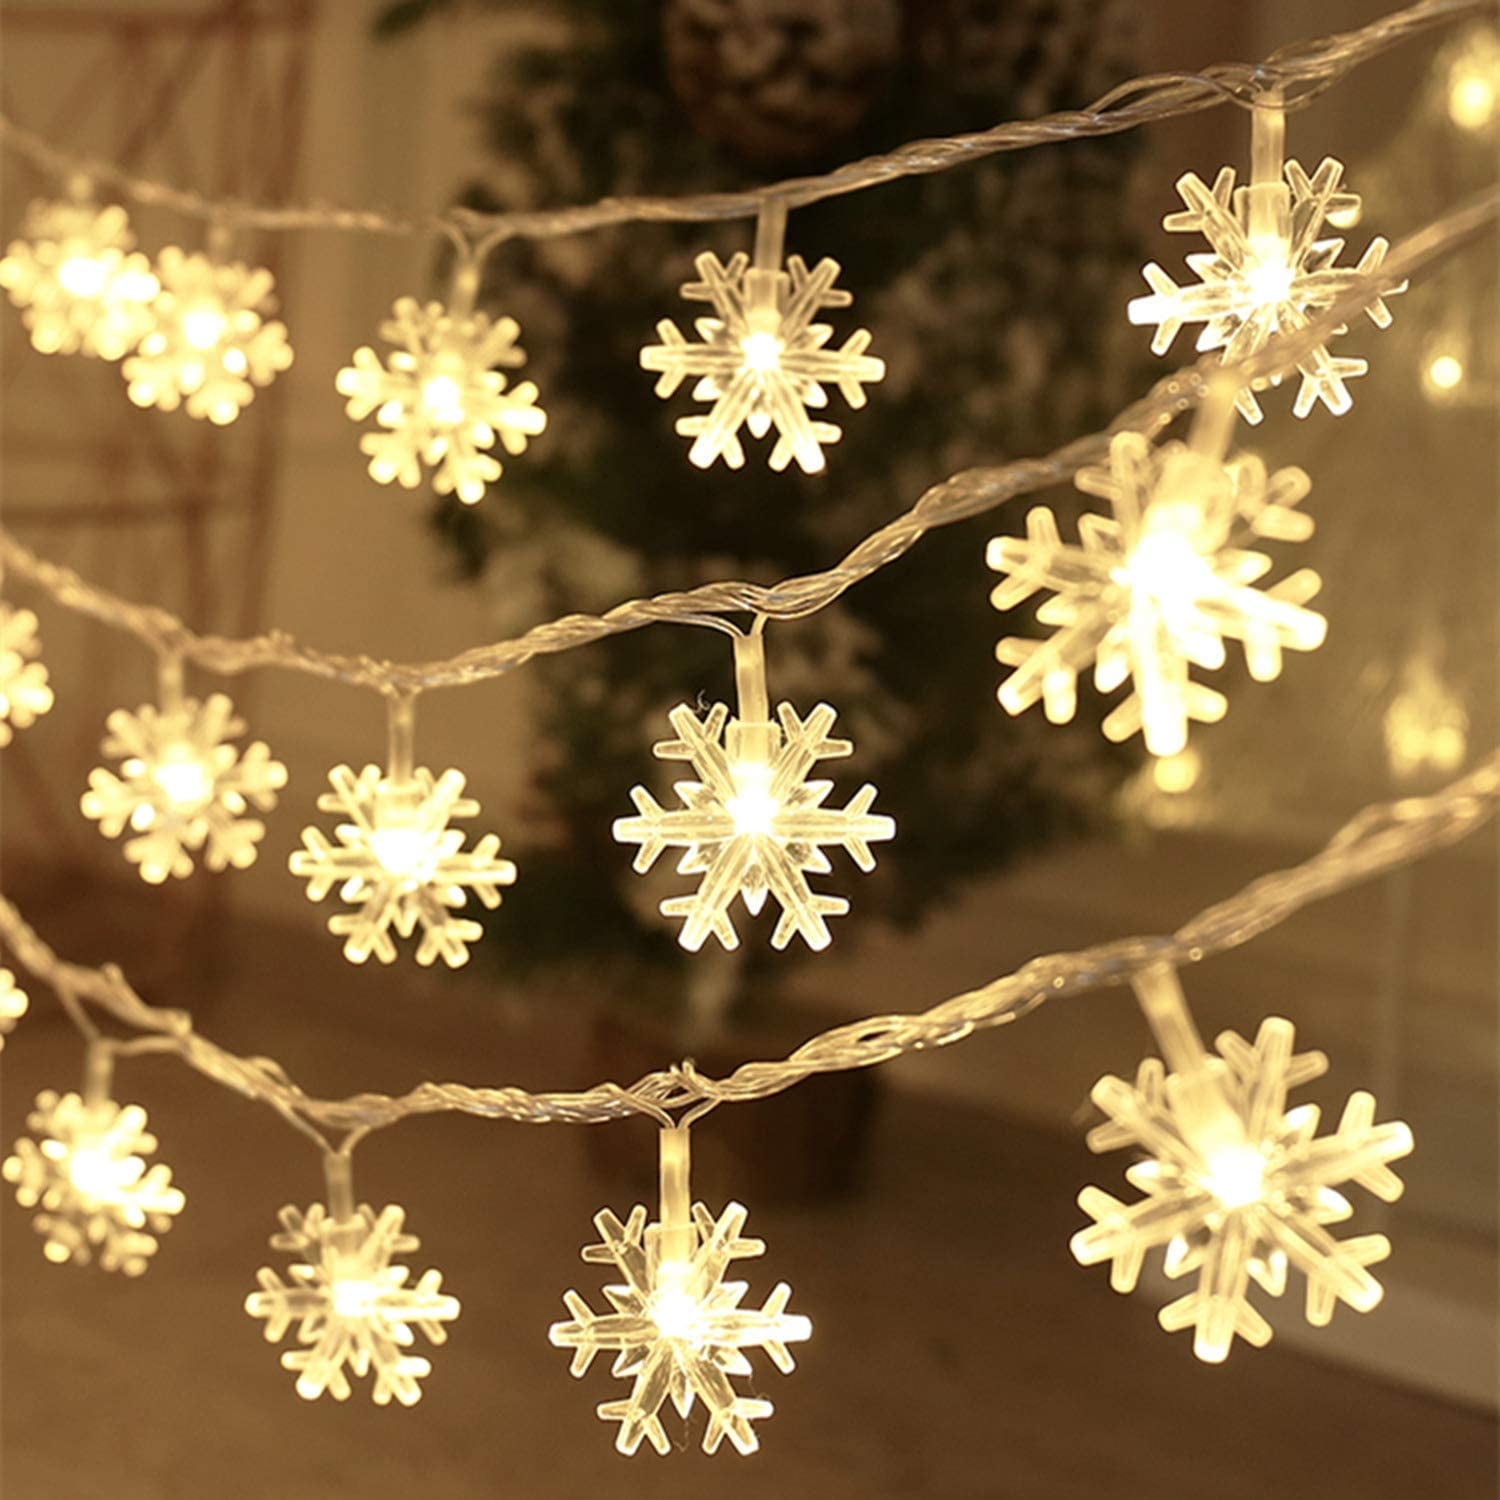 Christmas Fairy Lights LED Strings Battery Operated Indoor Xmas Home Decoration 